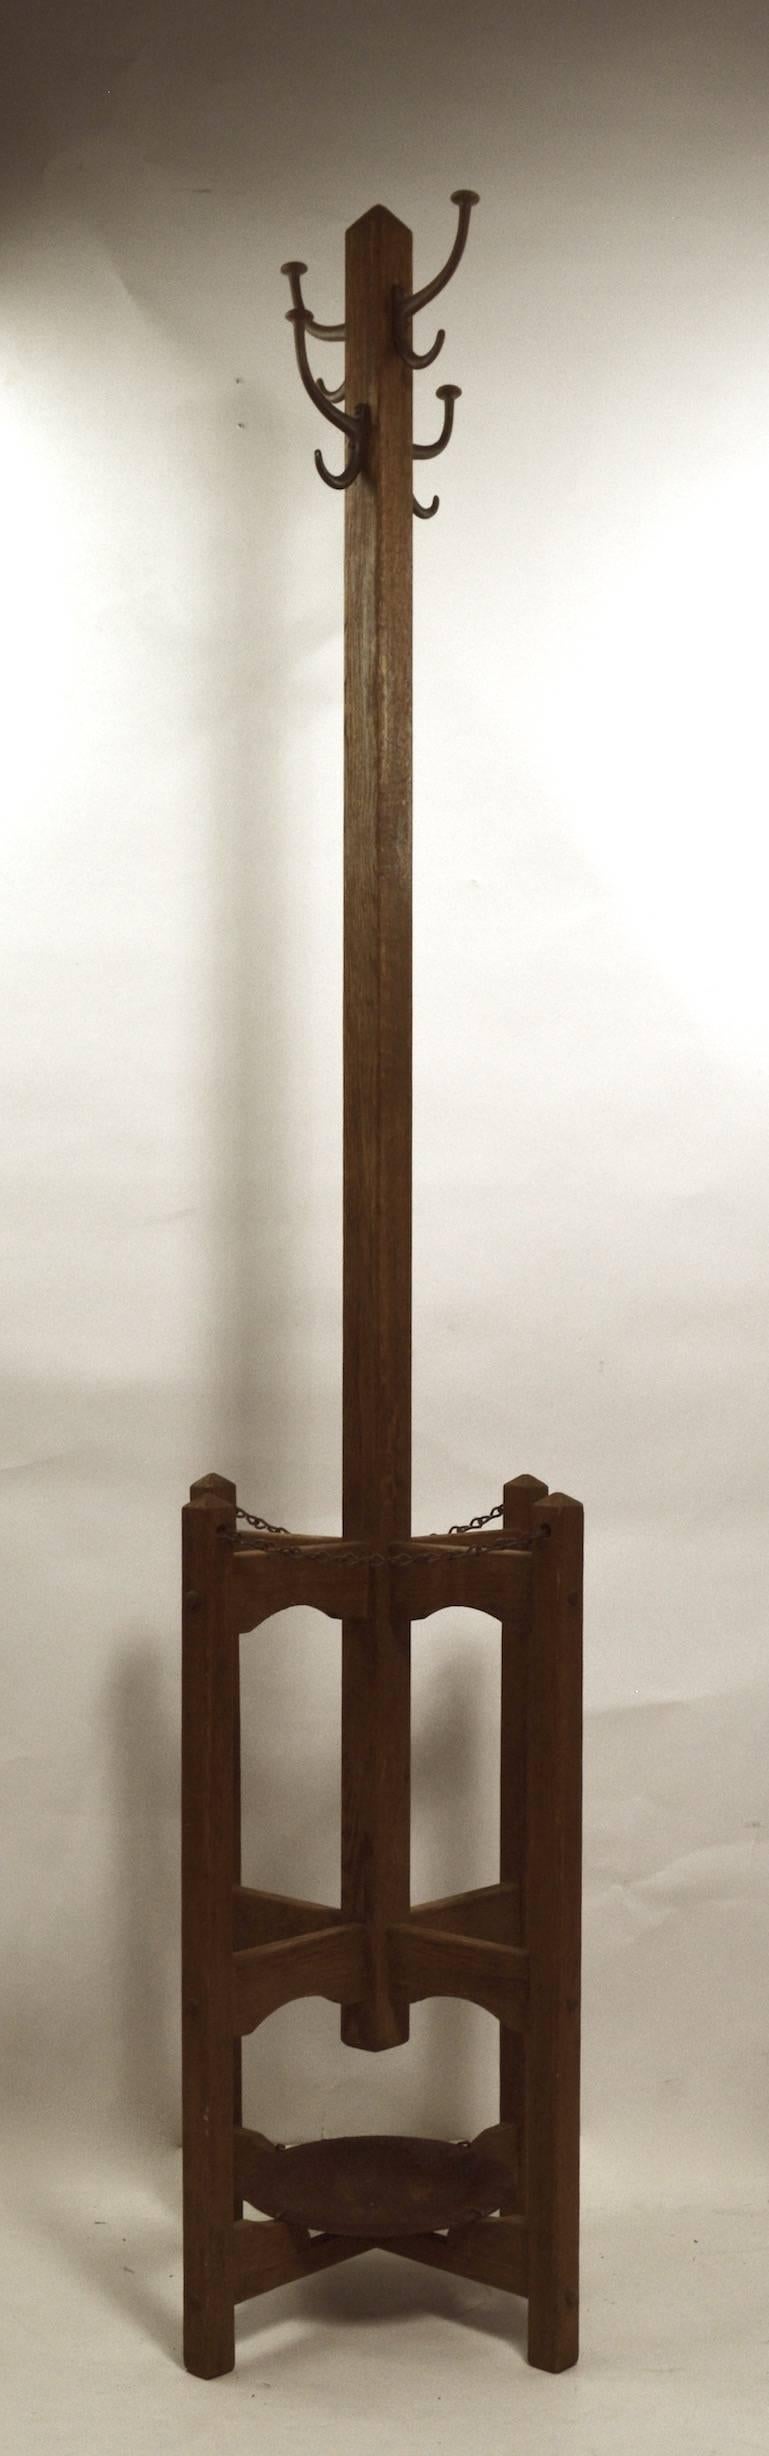 Mission Arts & Crafts coat rack with umbrella holder base. This example is in original condition, showing some light cosmetic wear to finish, and rust on metal tray, normal and consistent with age. Four metal hooks at top (9 inch width at top) each